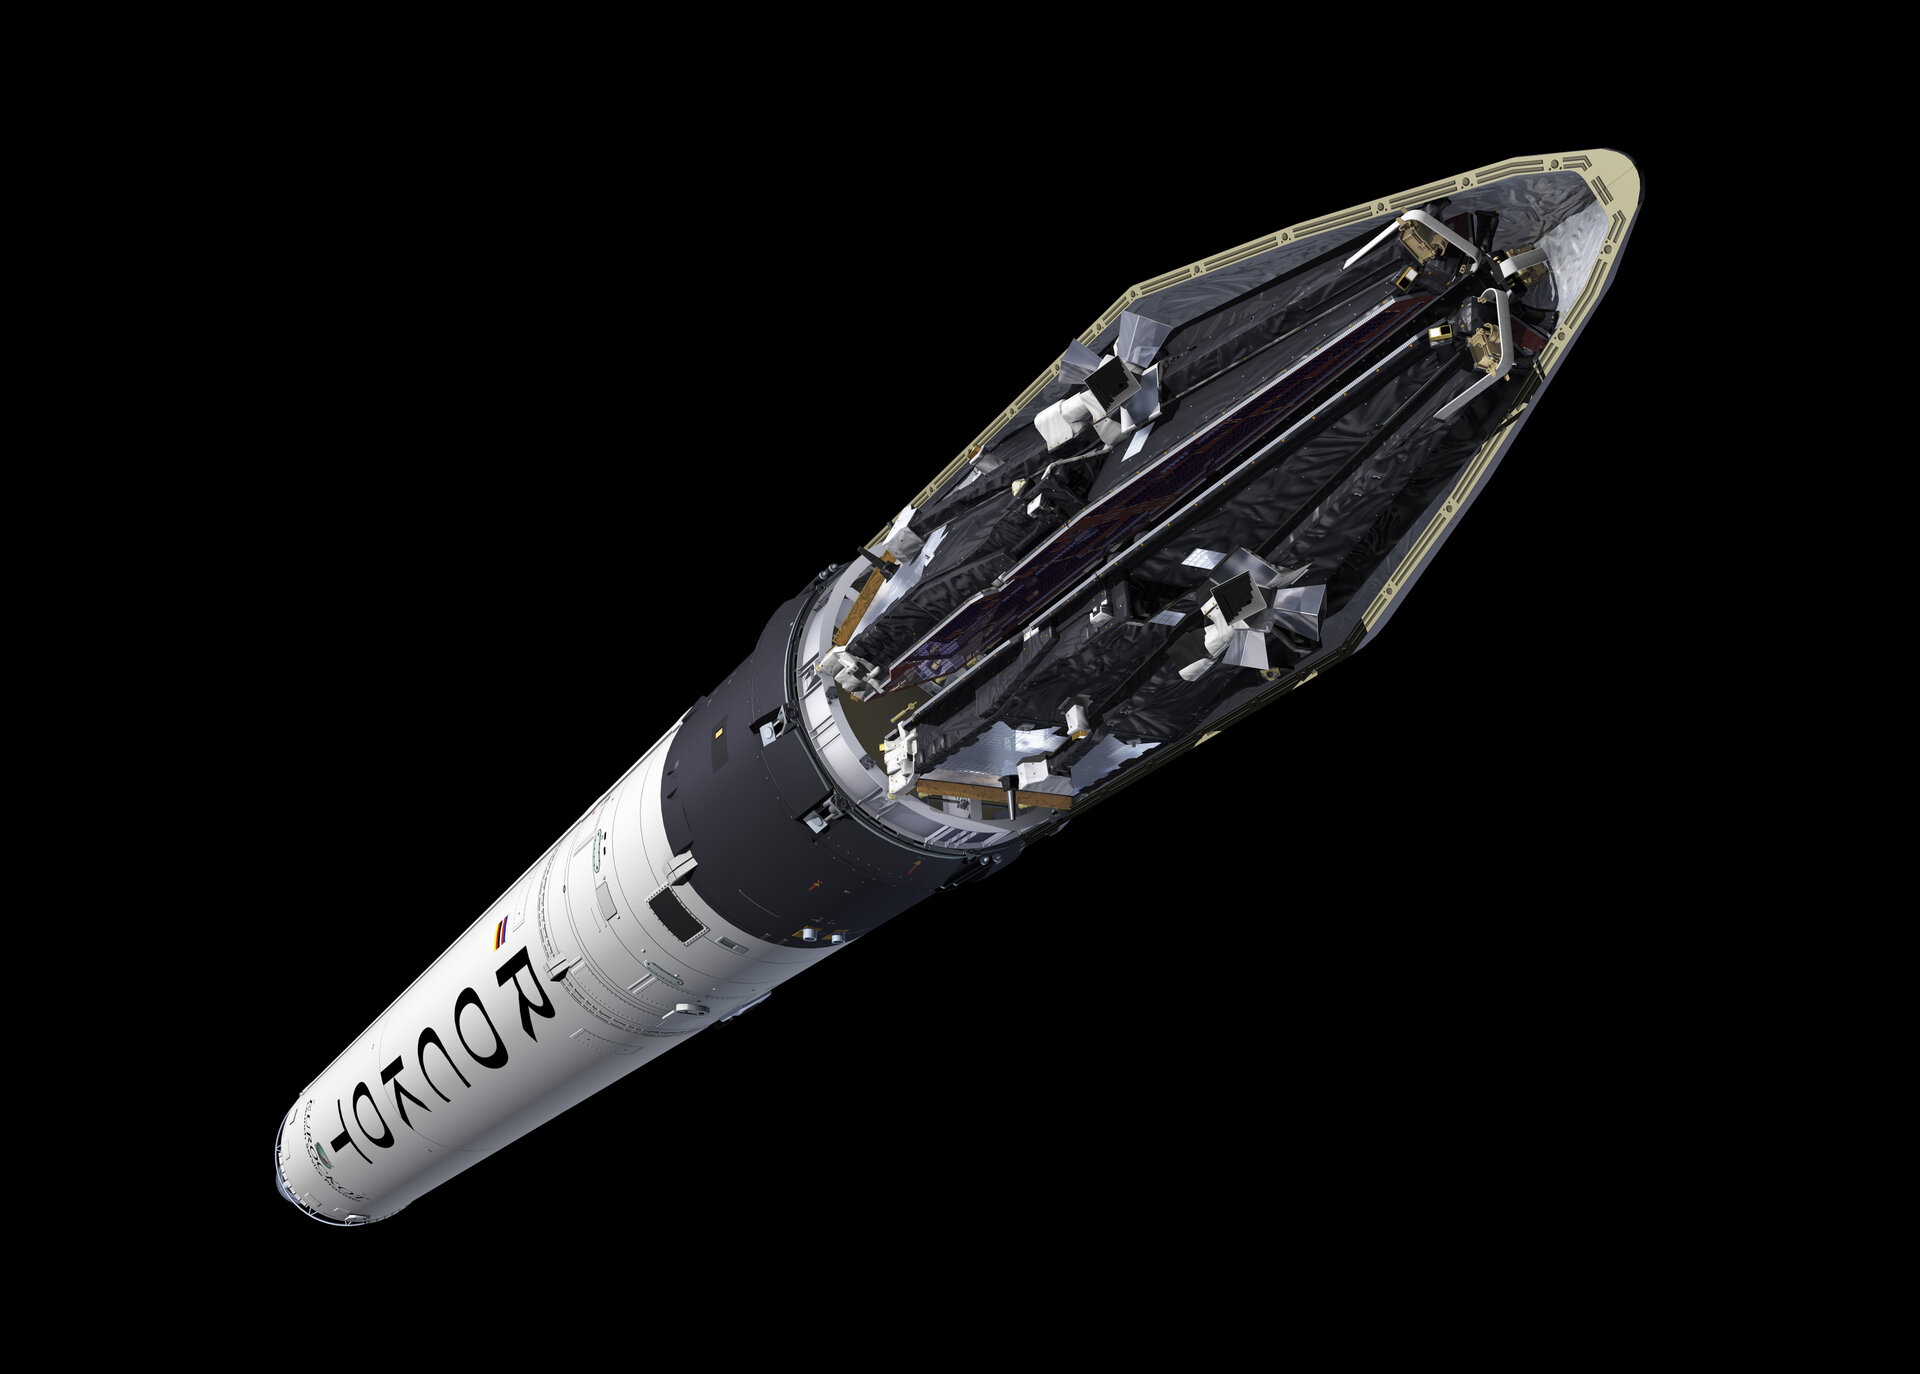 Artist's view of Swarm on a Rockot launcher